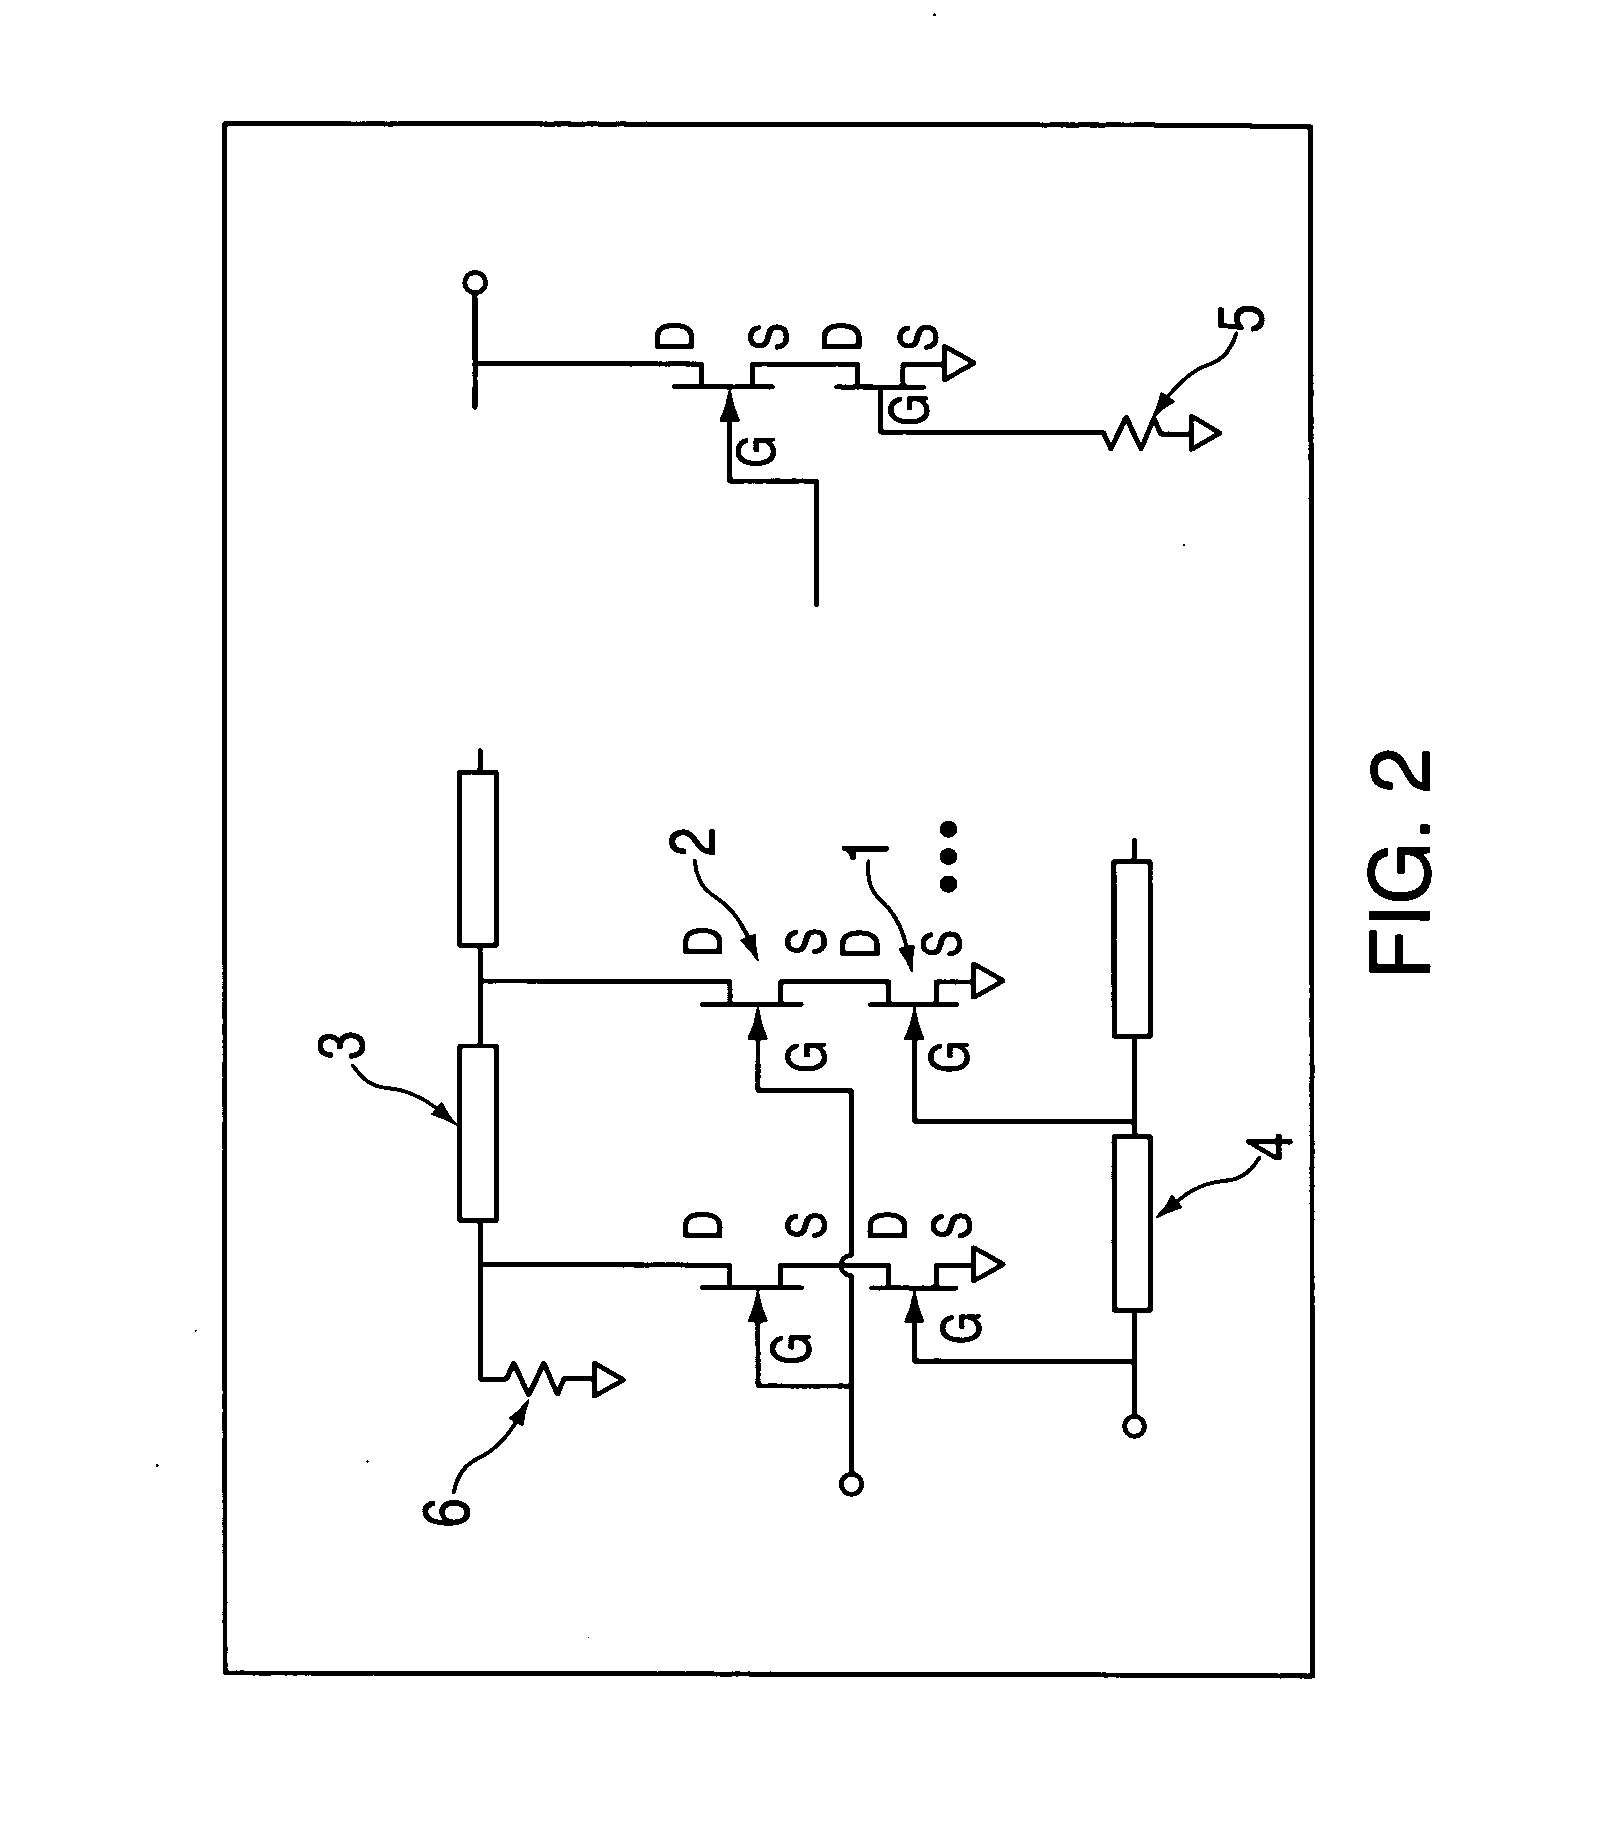 Traveling wave amplifier with distributed regenerative feedback between drain-to-drain transmission lines and gate-to-gate transmission lines for enhanced high frequency bandwidth